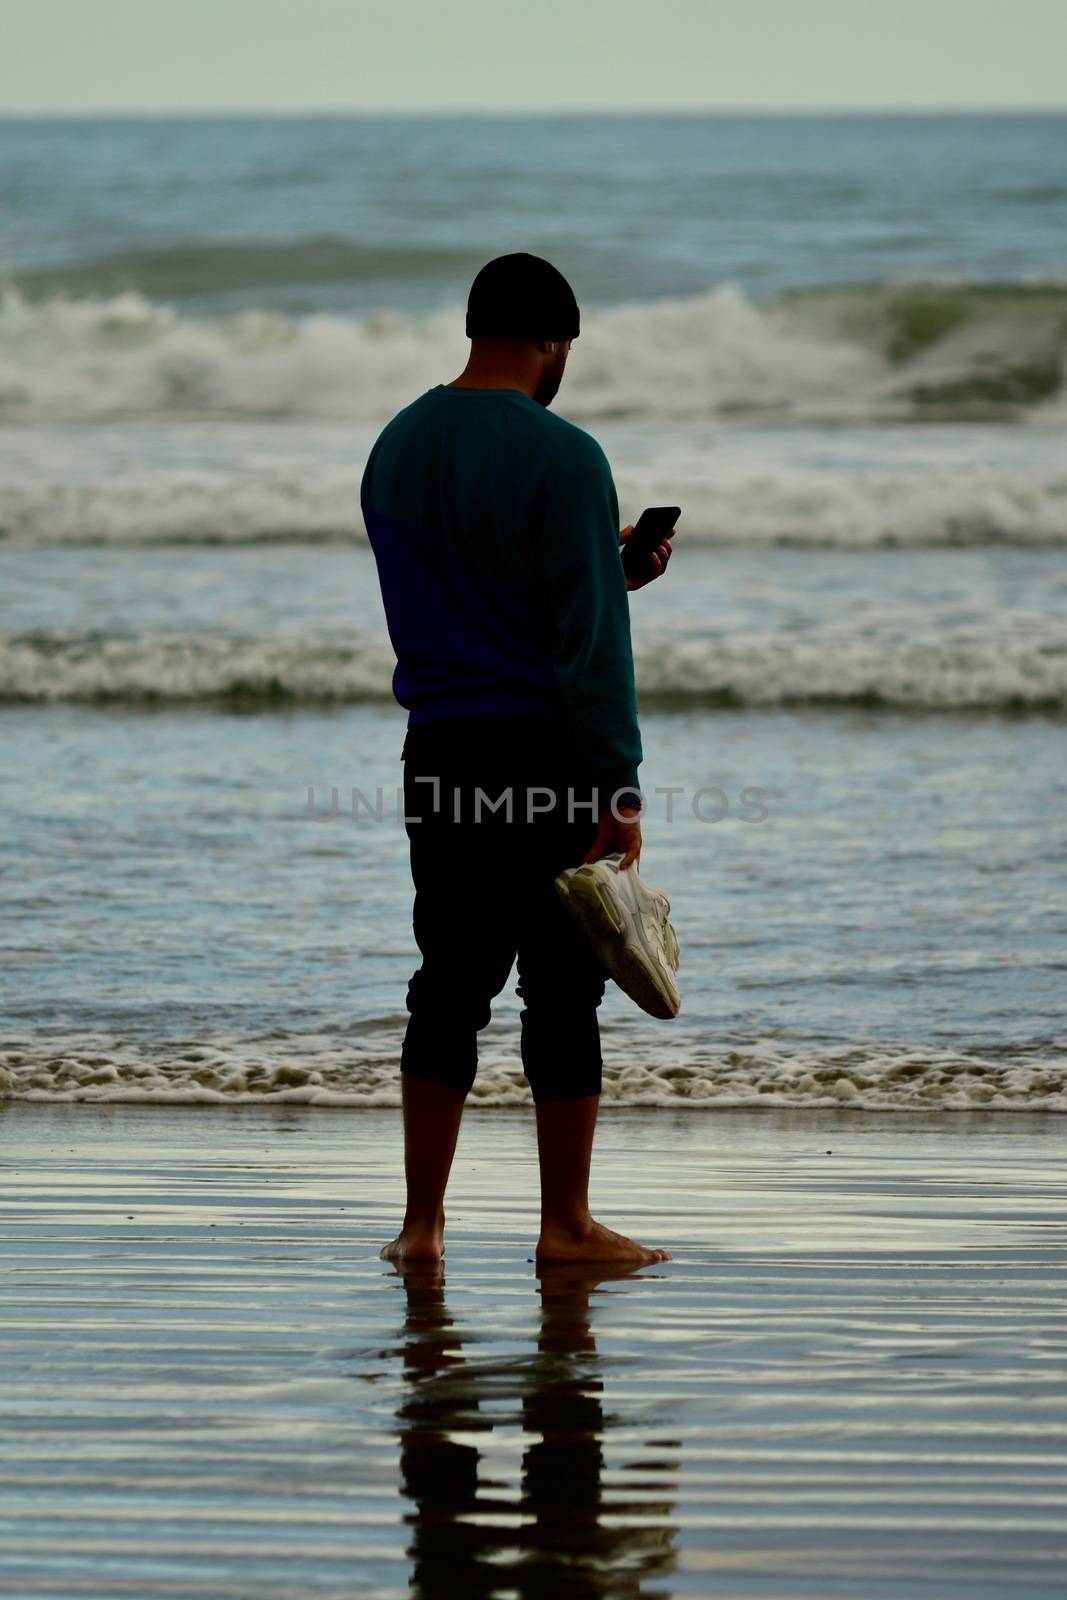 Leisure activities; walking on a beach; a man reading on his phone; taking a photo with a phone camera